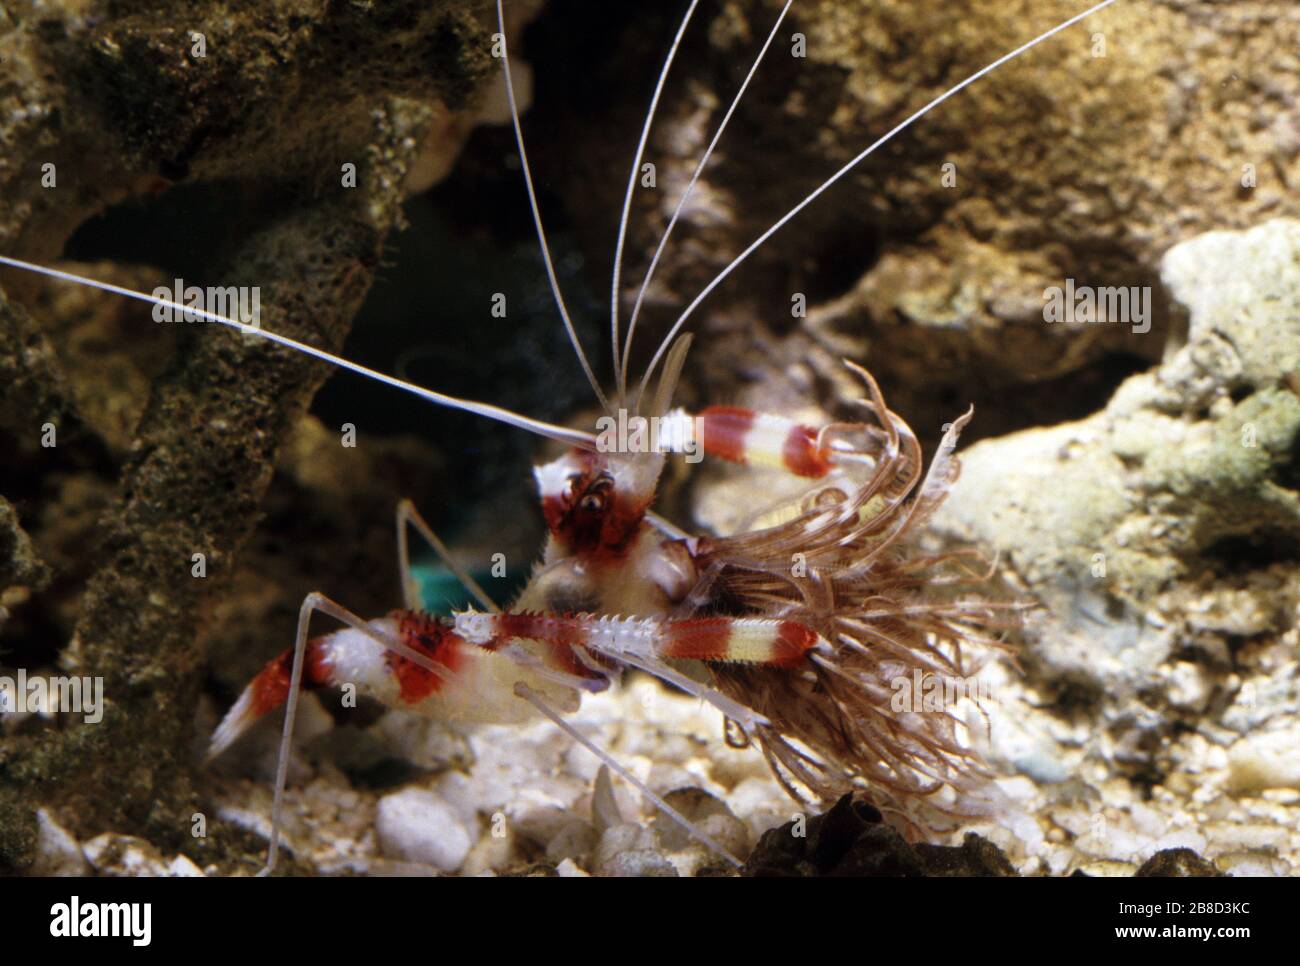 Banded coral shrimp (Stenopus hispidus), eating a feather tubeworm Stock Photo